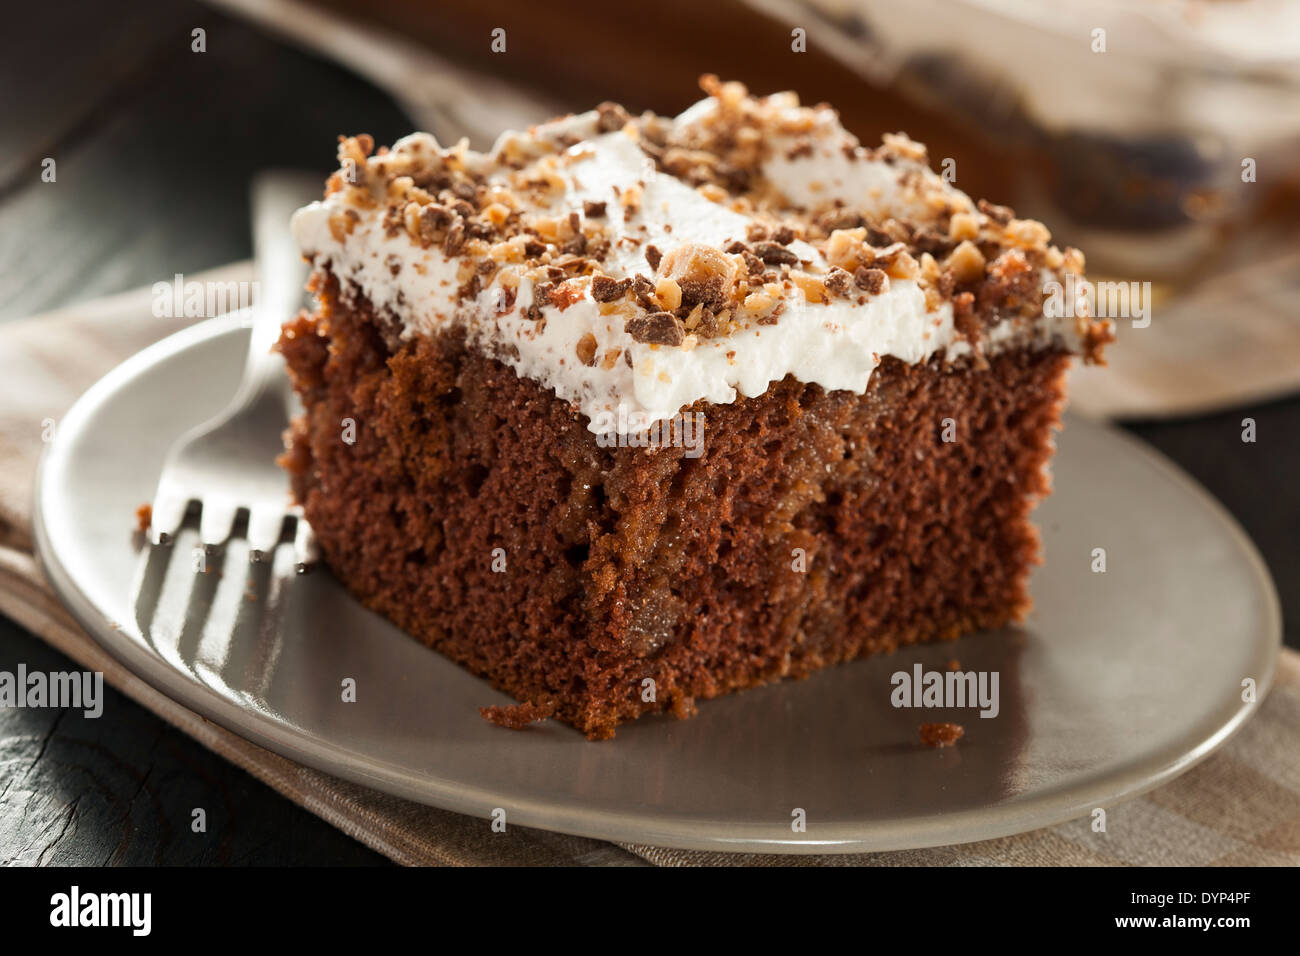 Homemade Toffee and Chocolate Cake with Vanilla Frosting Stock Photo